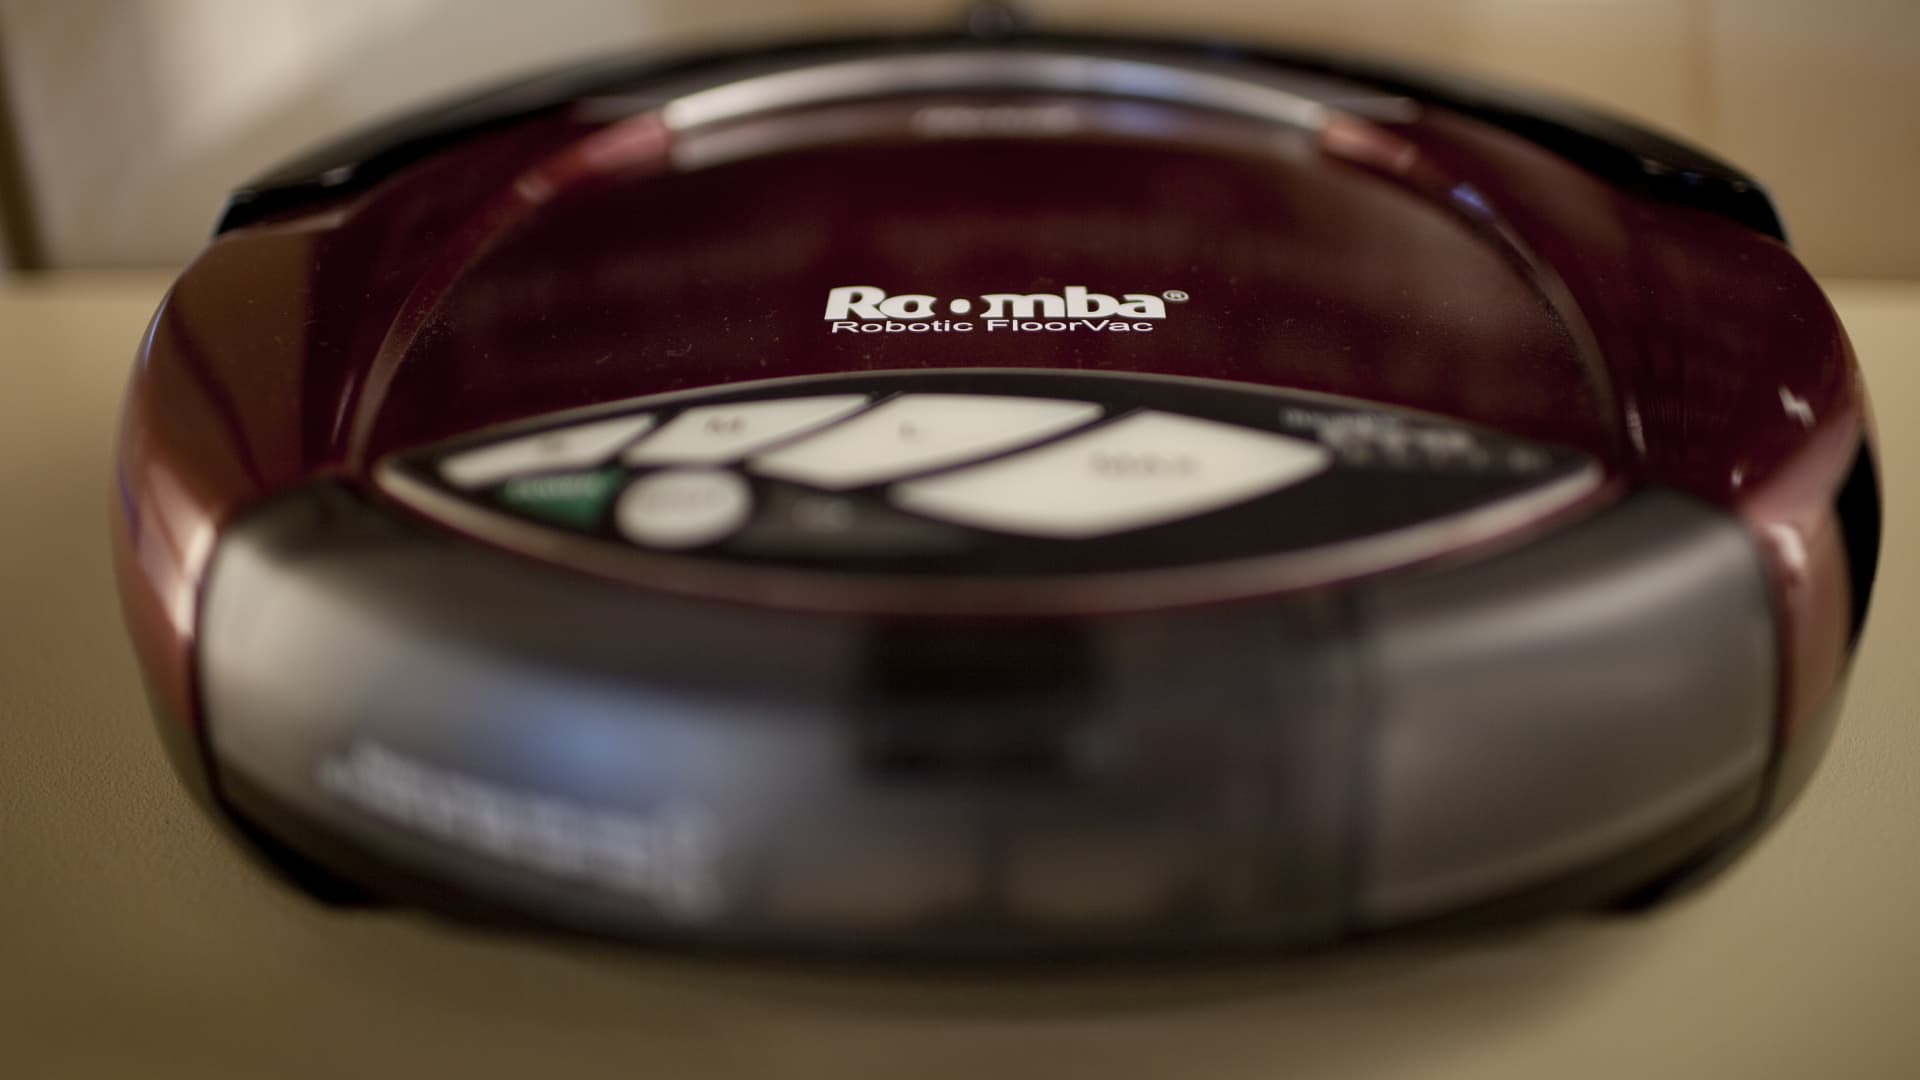 Roomba maker iRobot to lay off about 7% of its workforce